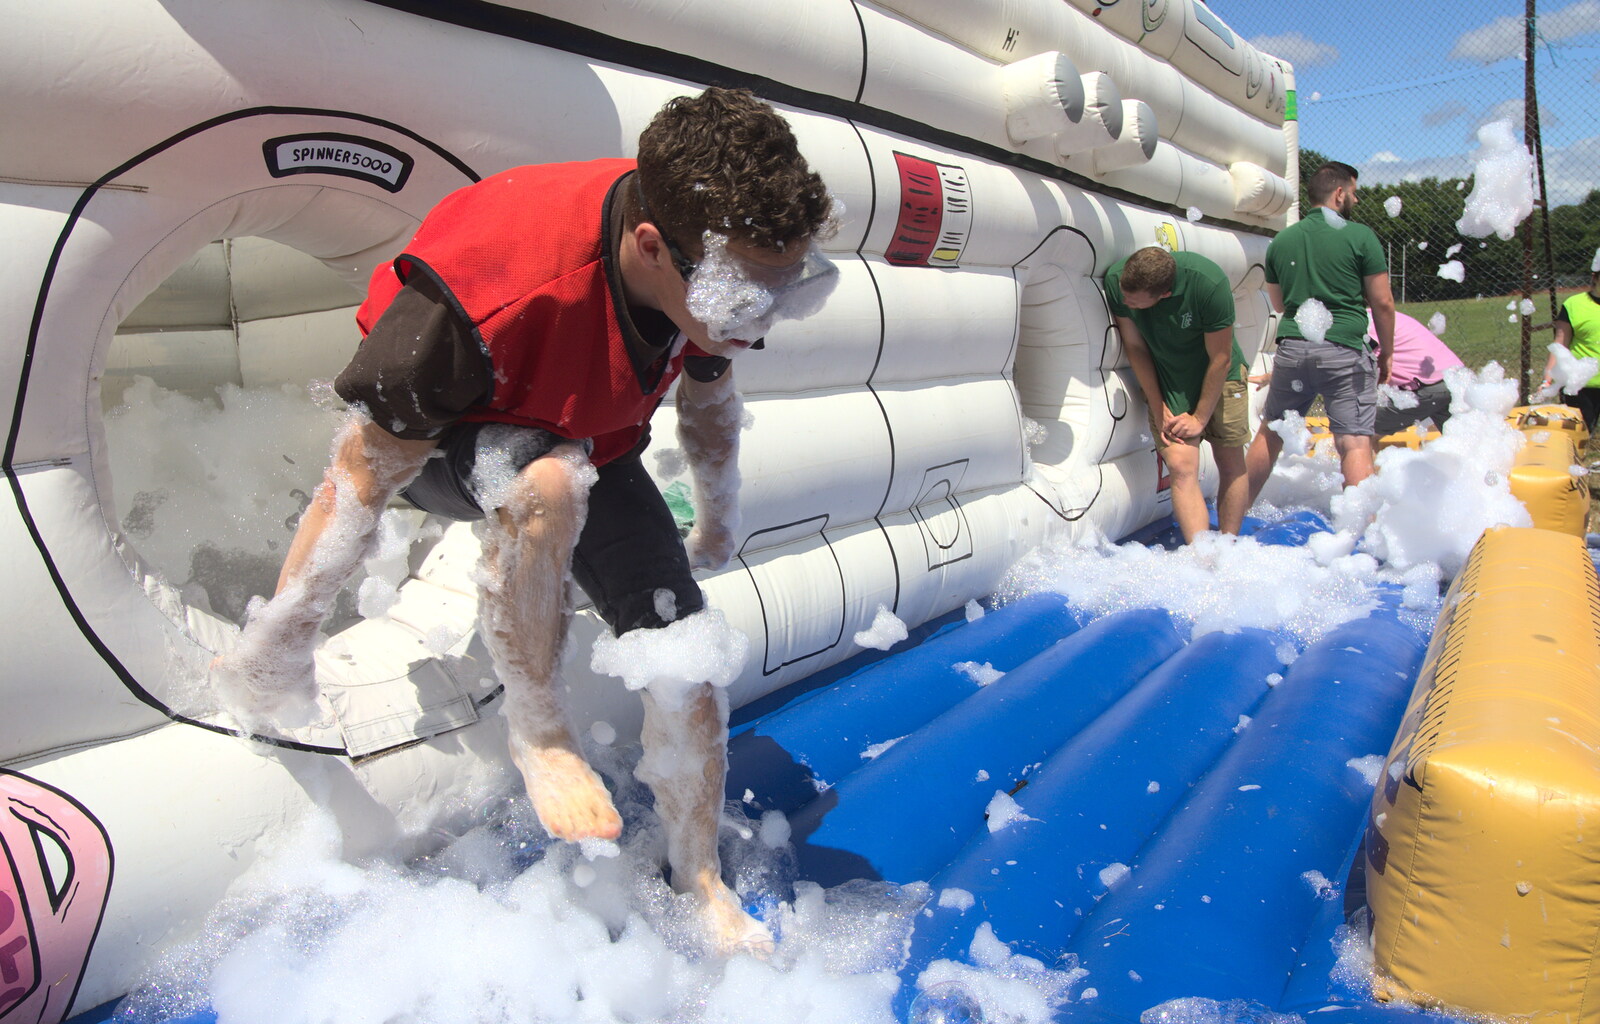 Adam exits, covered in foam from It's a SwiftKey Knockout, Richmond Rugby Club, Richmond, Surrey - 7th July 2015